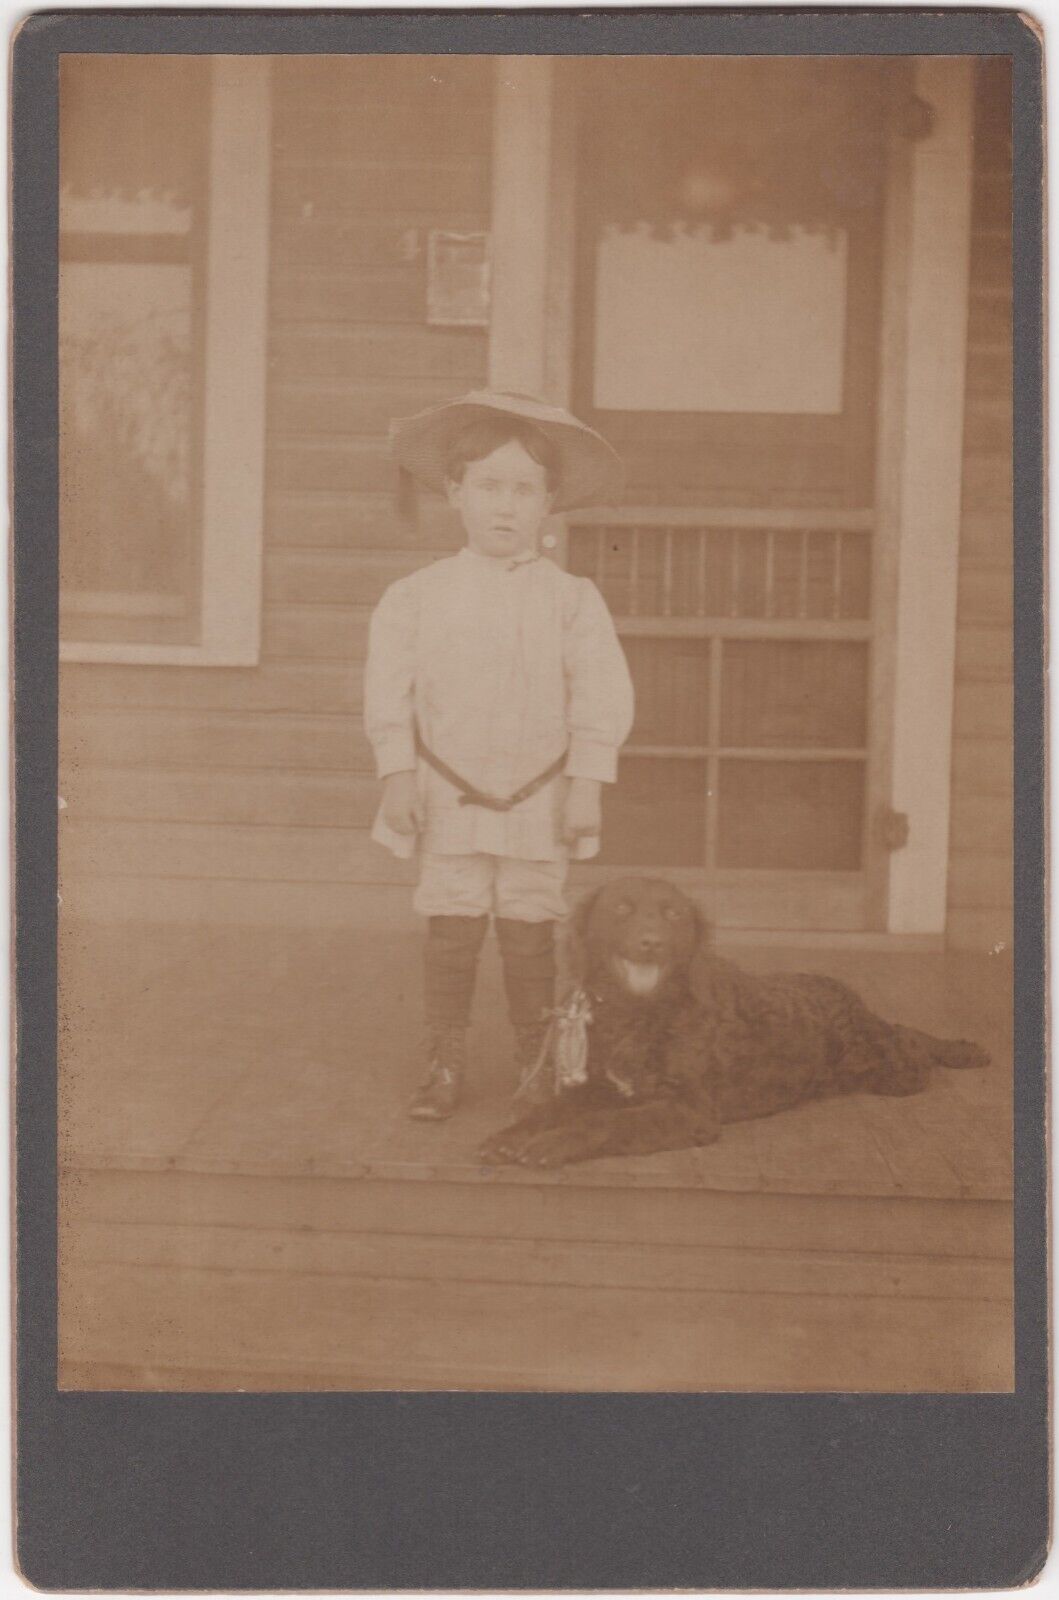 Darling Little Boy and Sweet Smiling Dog Oklahoma City IDd Antique Cabinet Photo